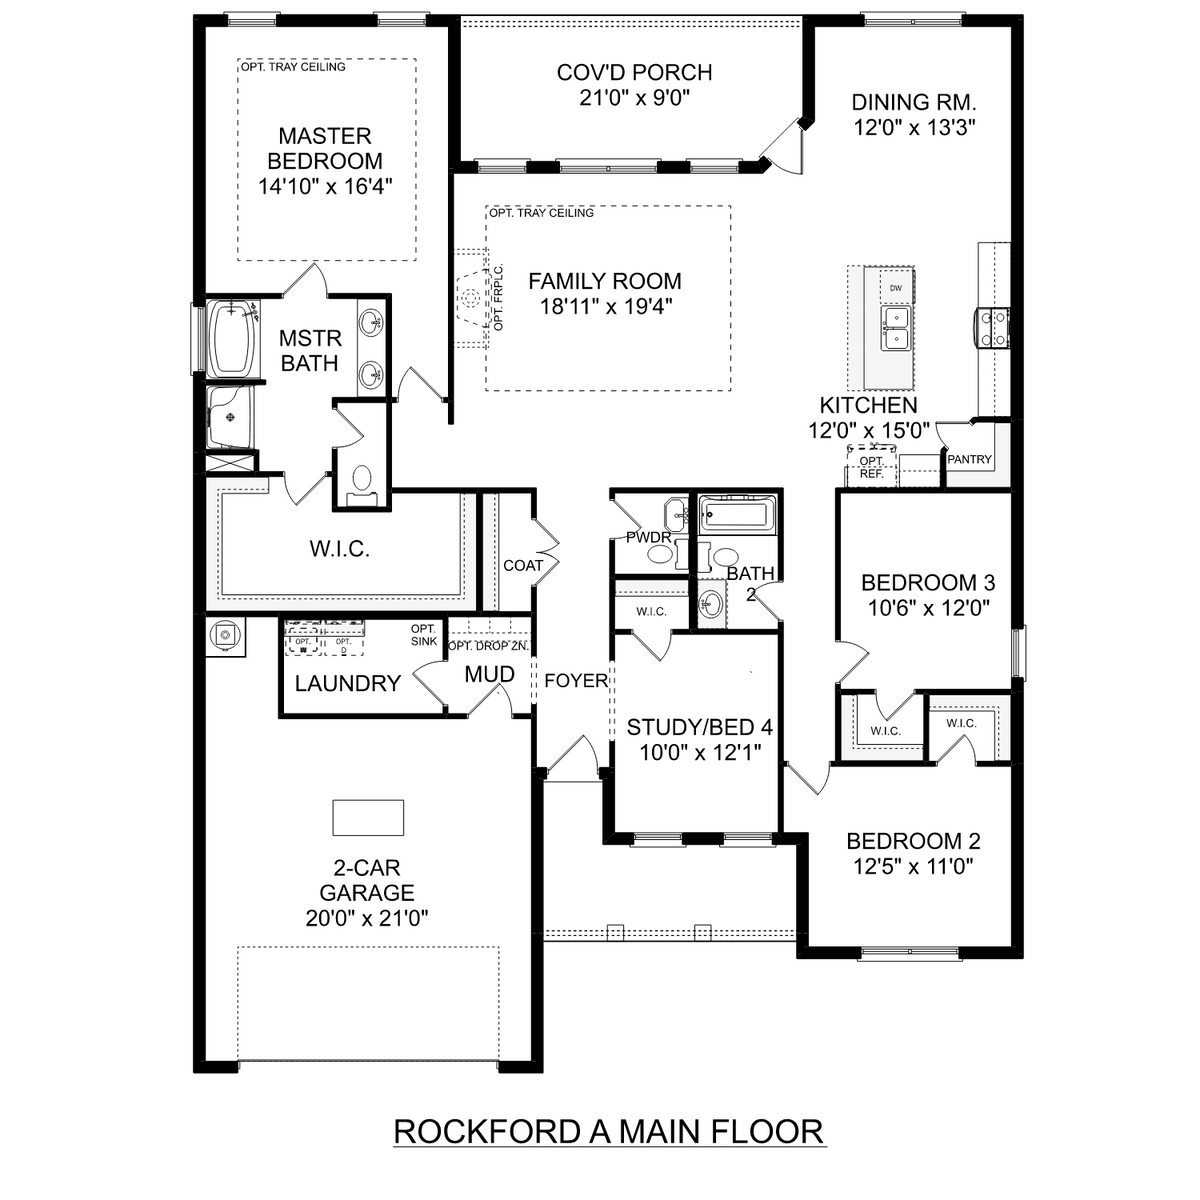 1 - The Rockford floor plan layout for 110 Nellies Way in Davidson Homes' Pikes Ridge community.